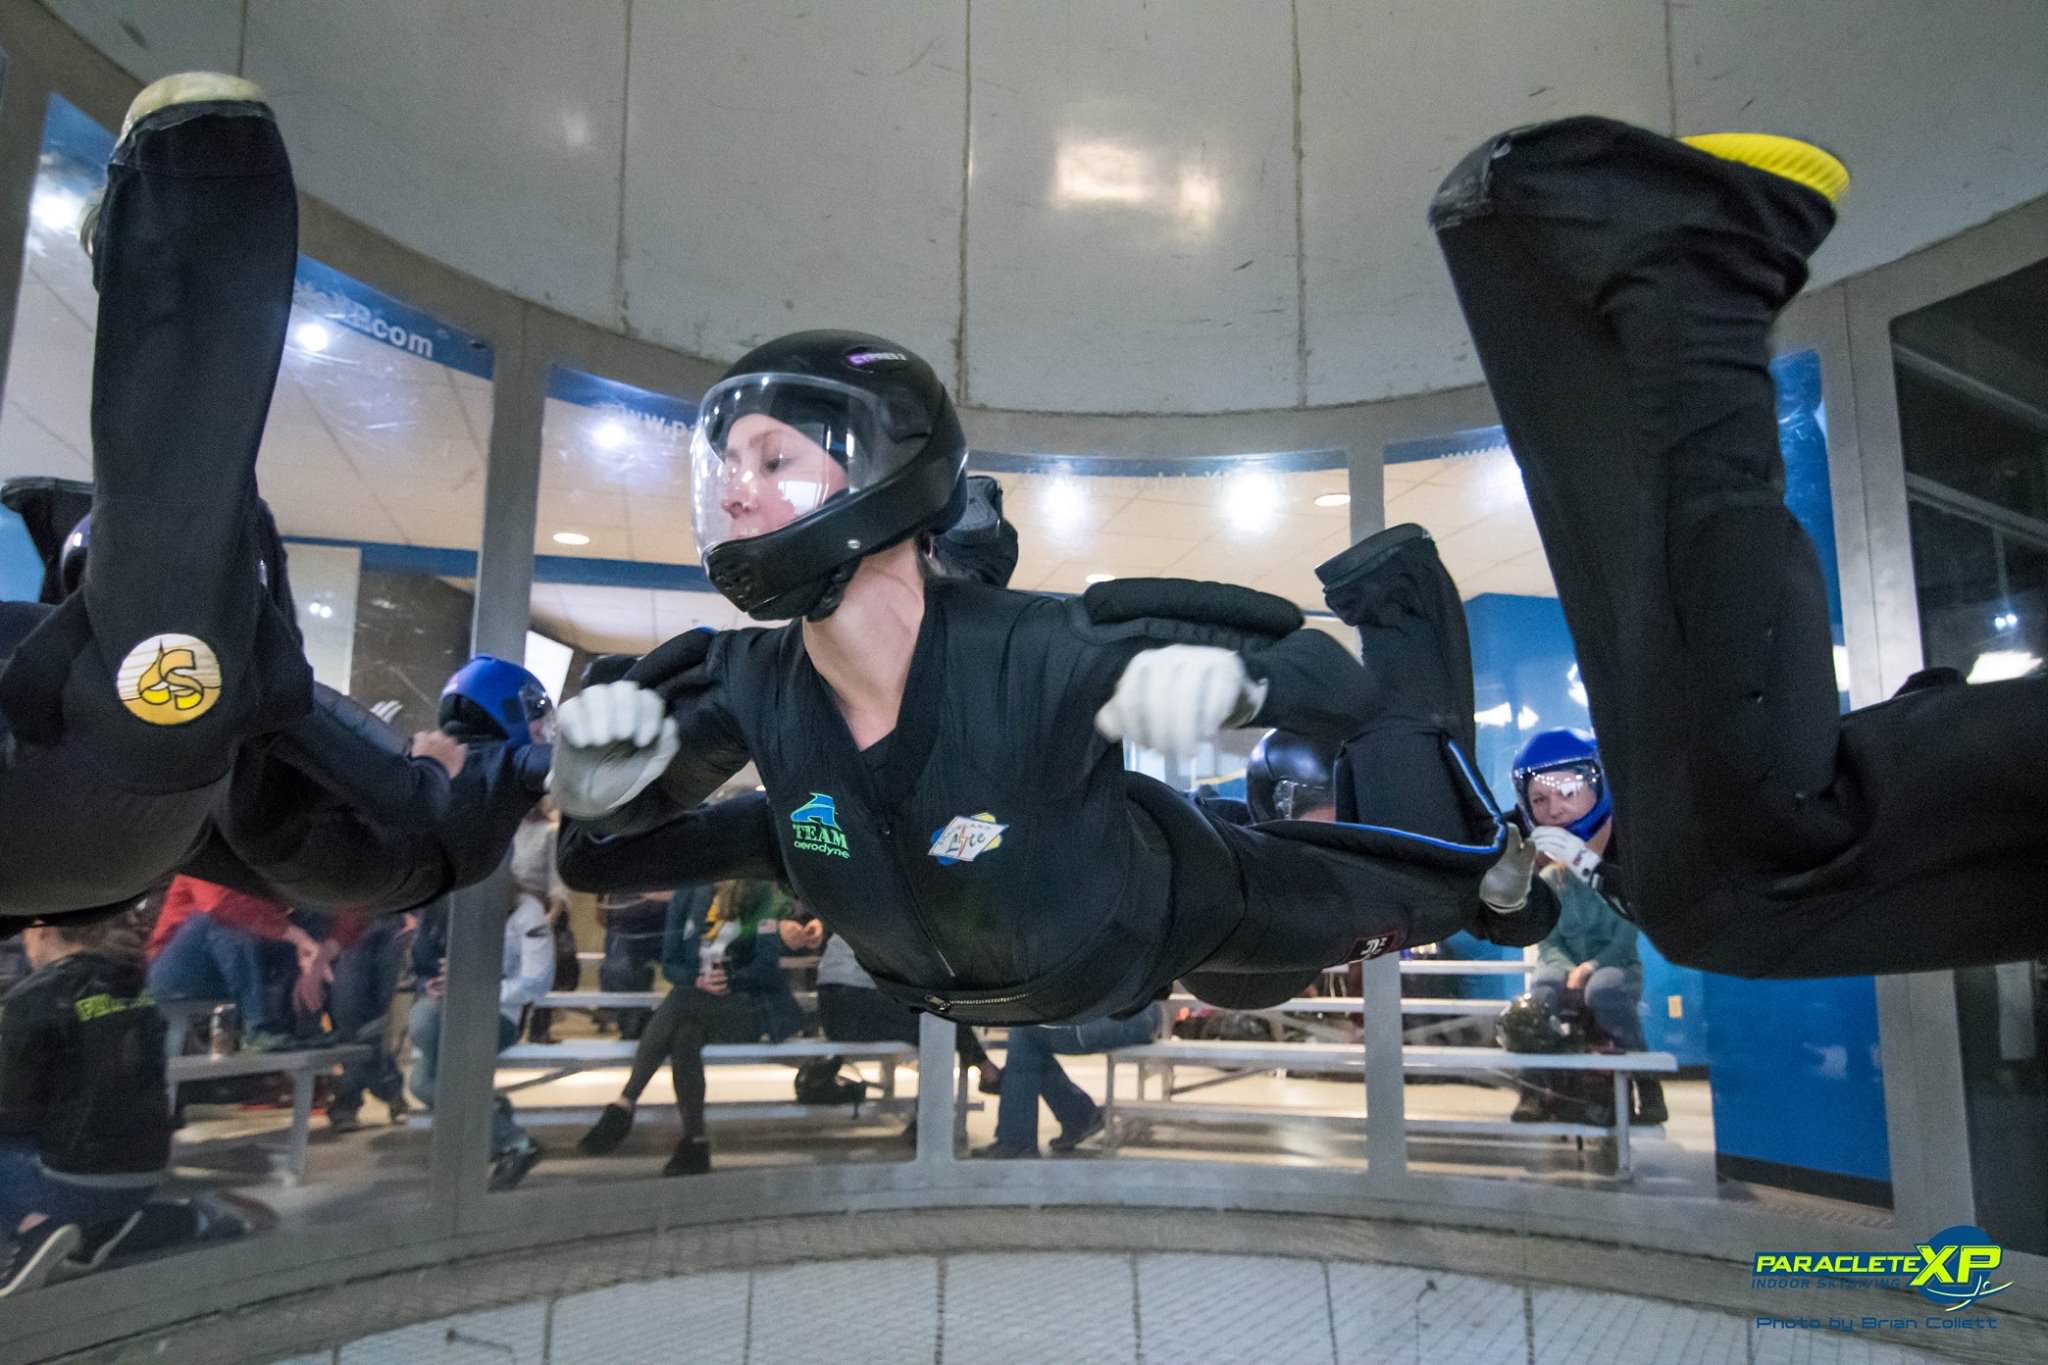 Introduction To The Principles Of Aerodynamics in Indoor Skydiving